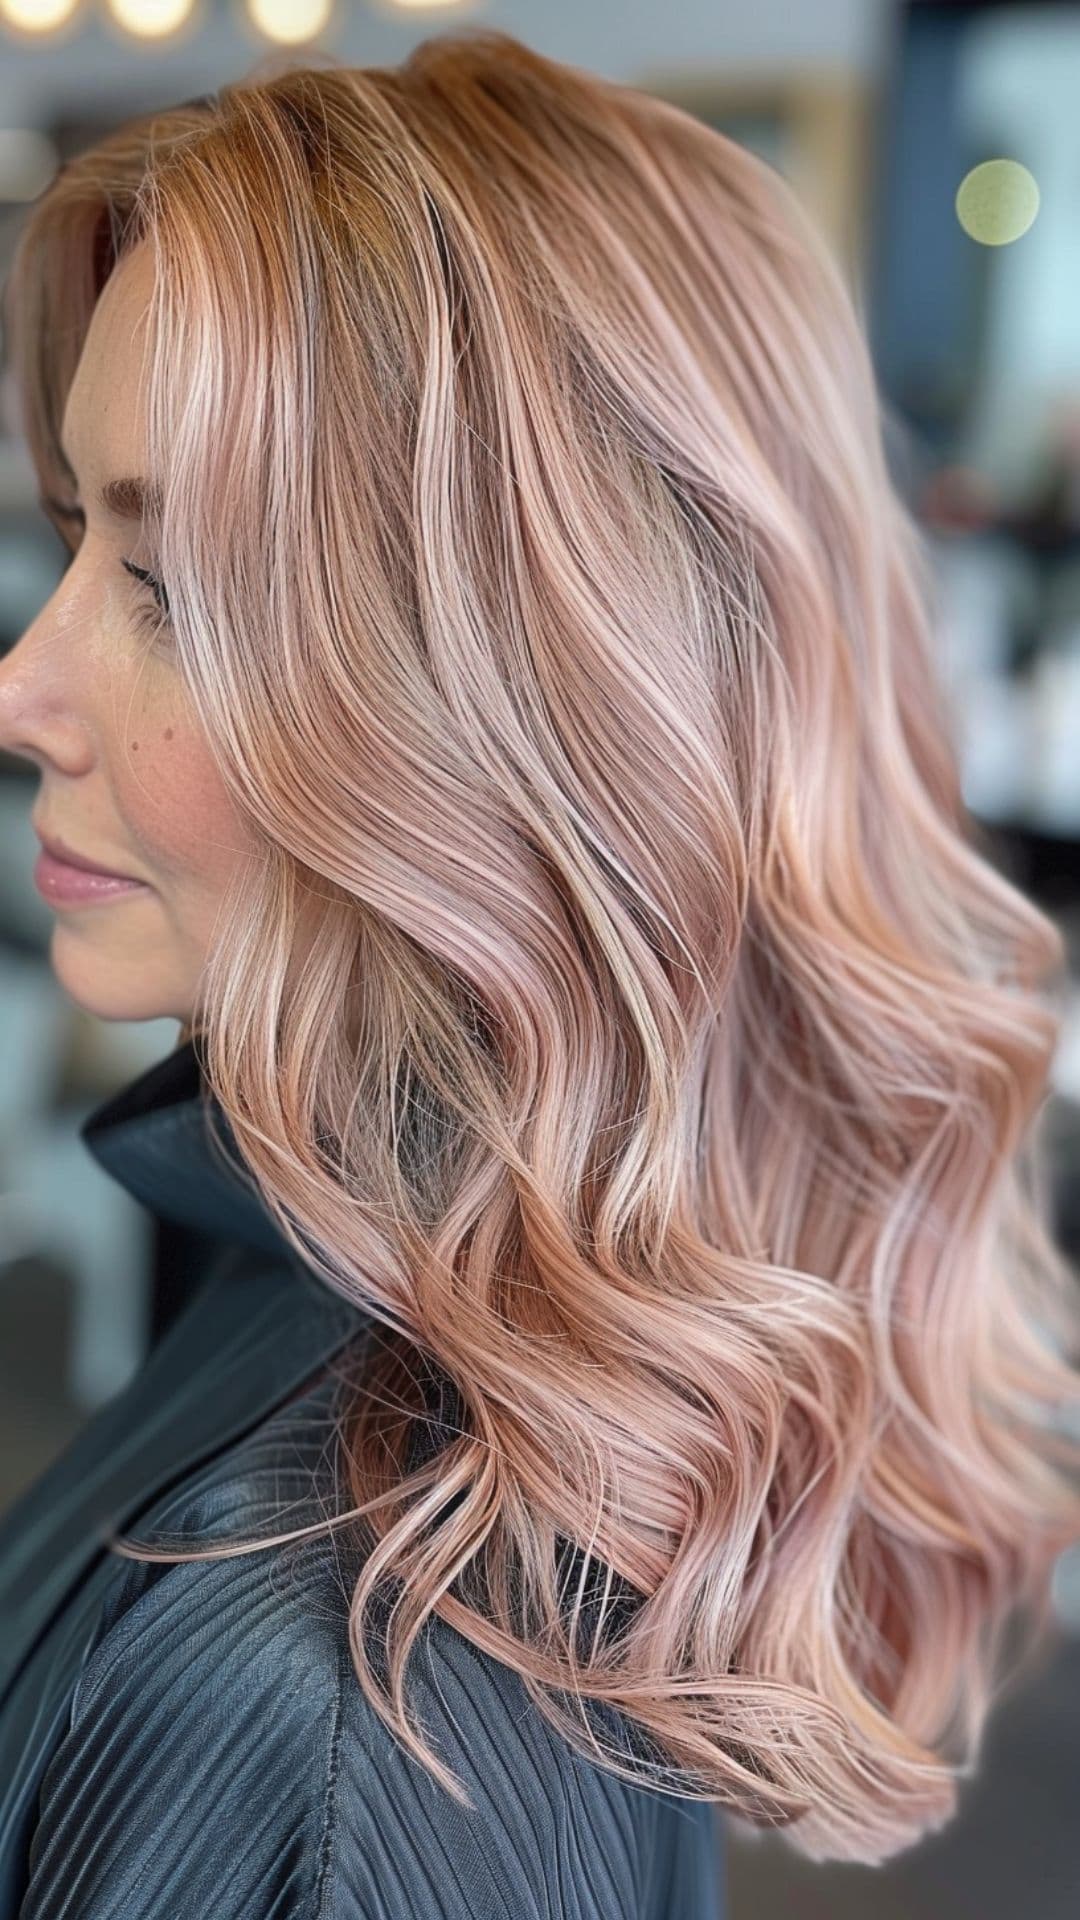 An old woman modelling a soft rose gold hair.